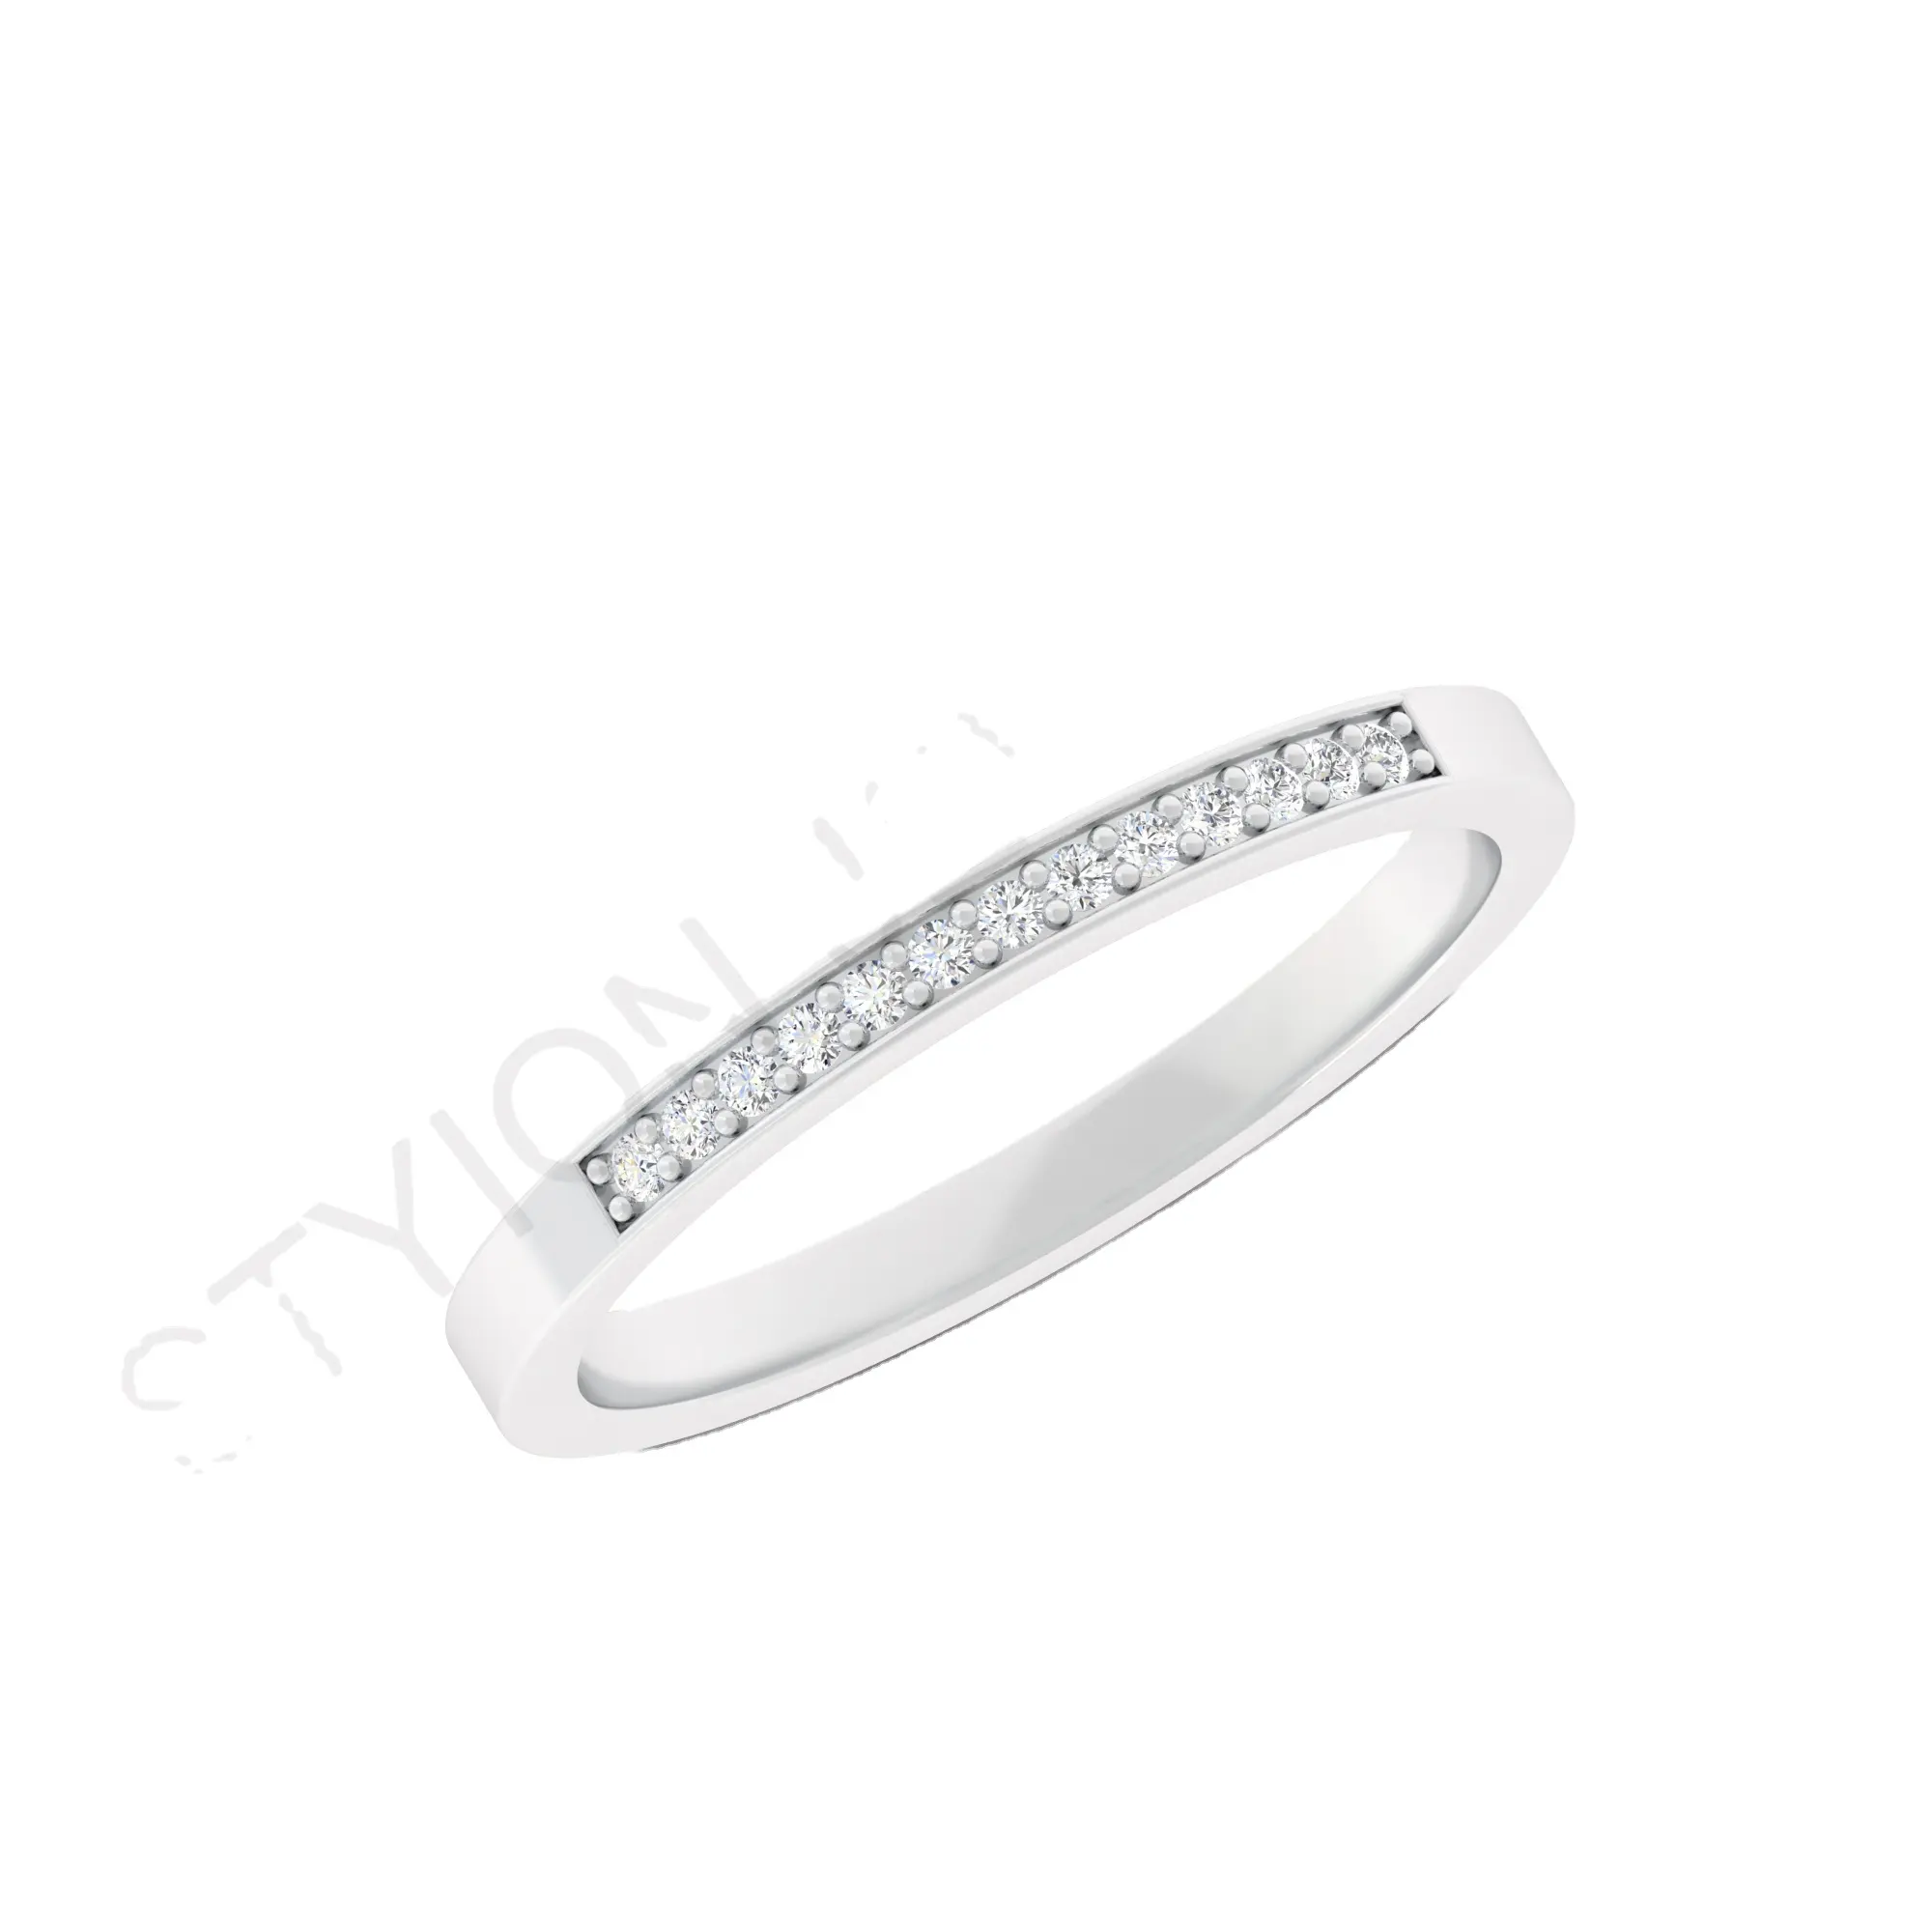 Wholesale Fashion Women Silver Ring with 1.9 Weight Womens Fine Jewellery Ring Available at Wholesale Price